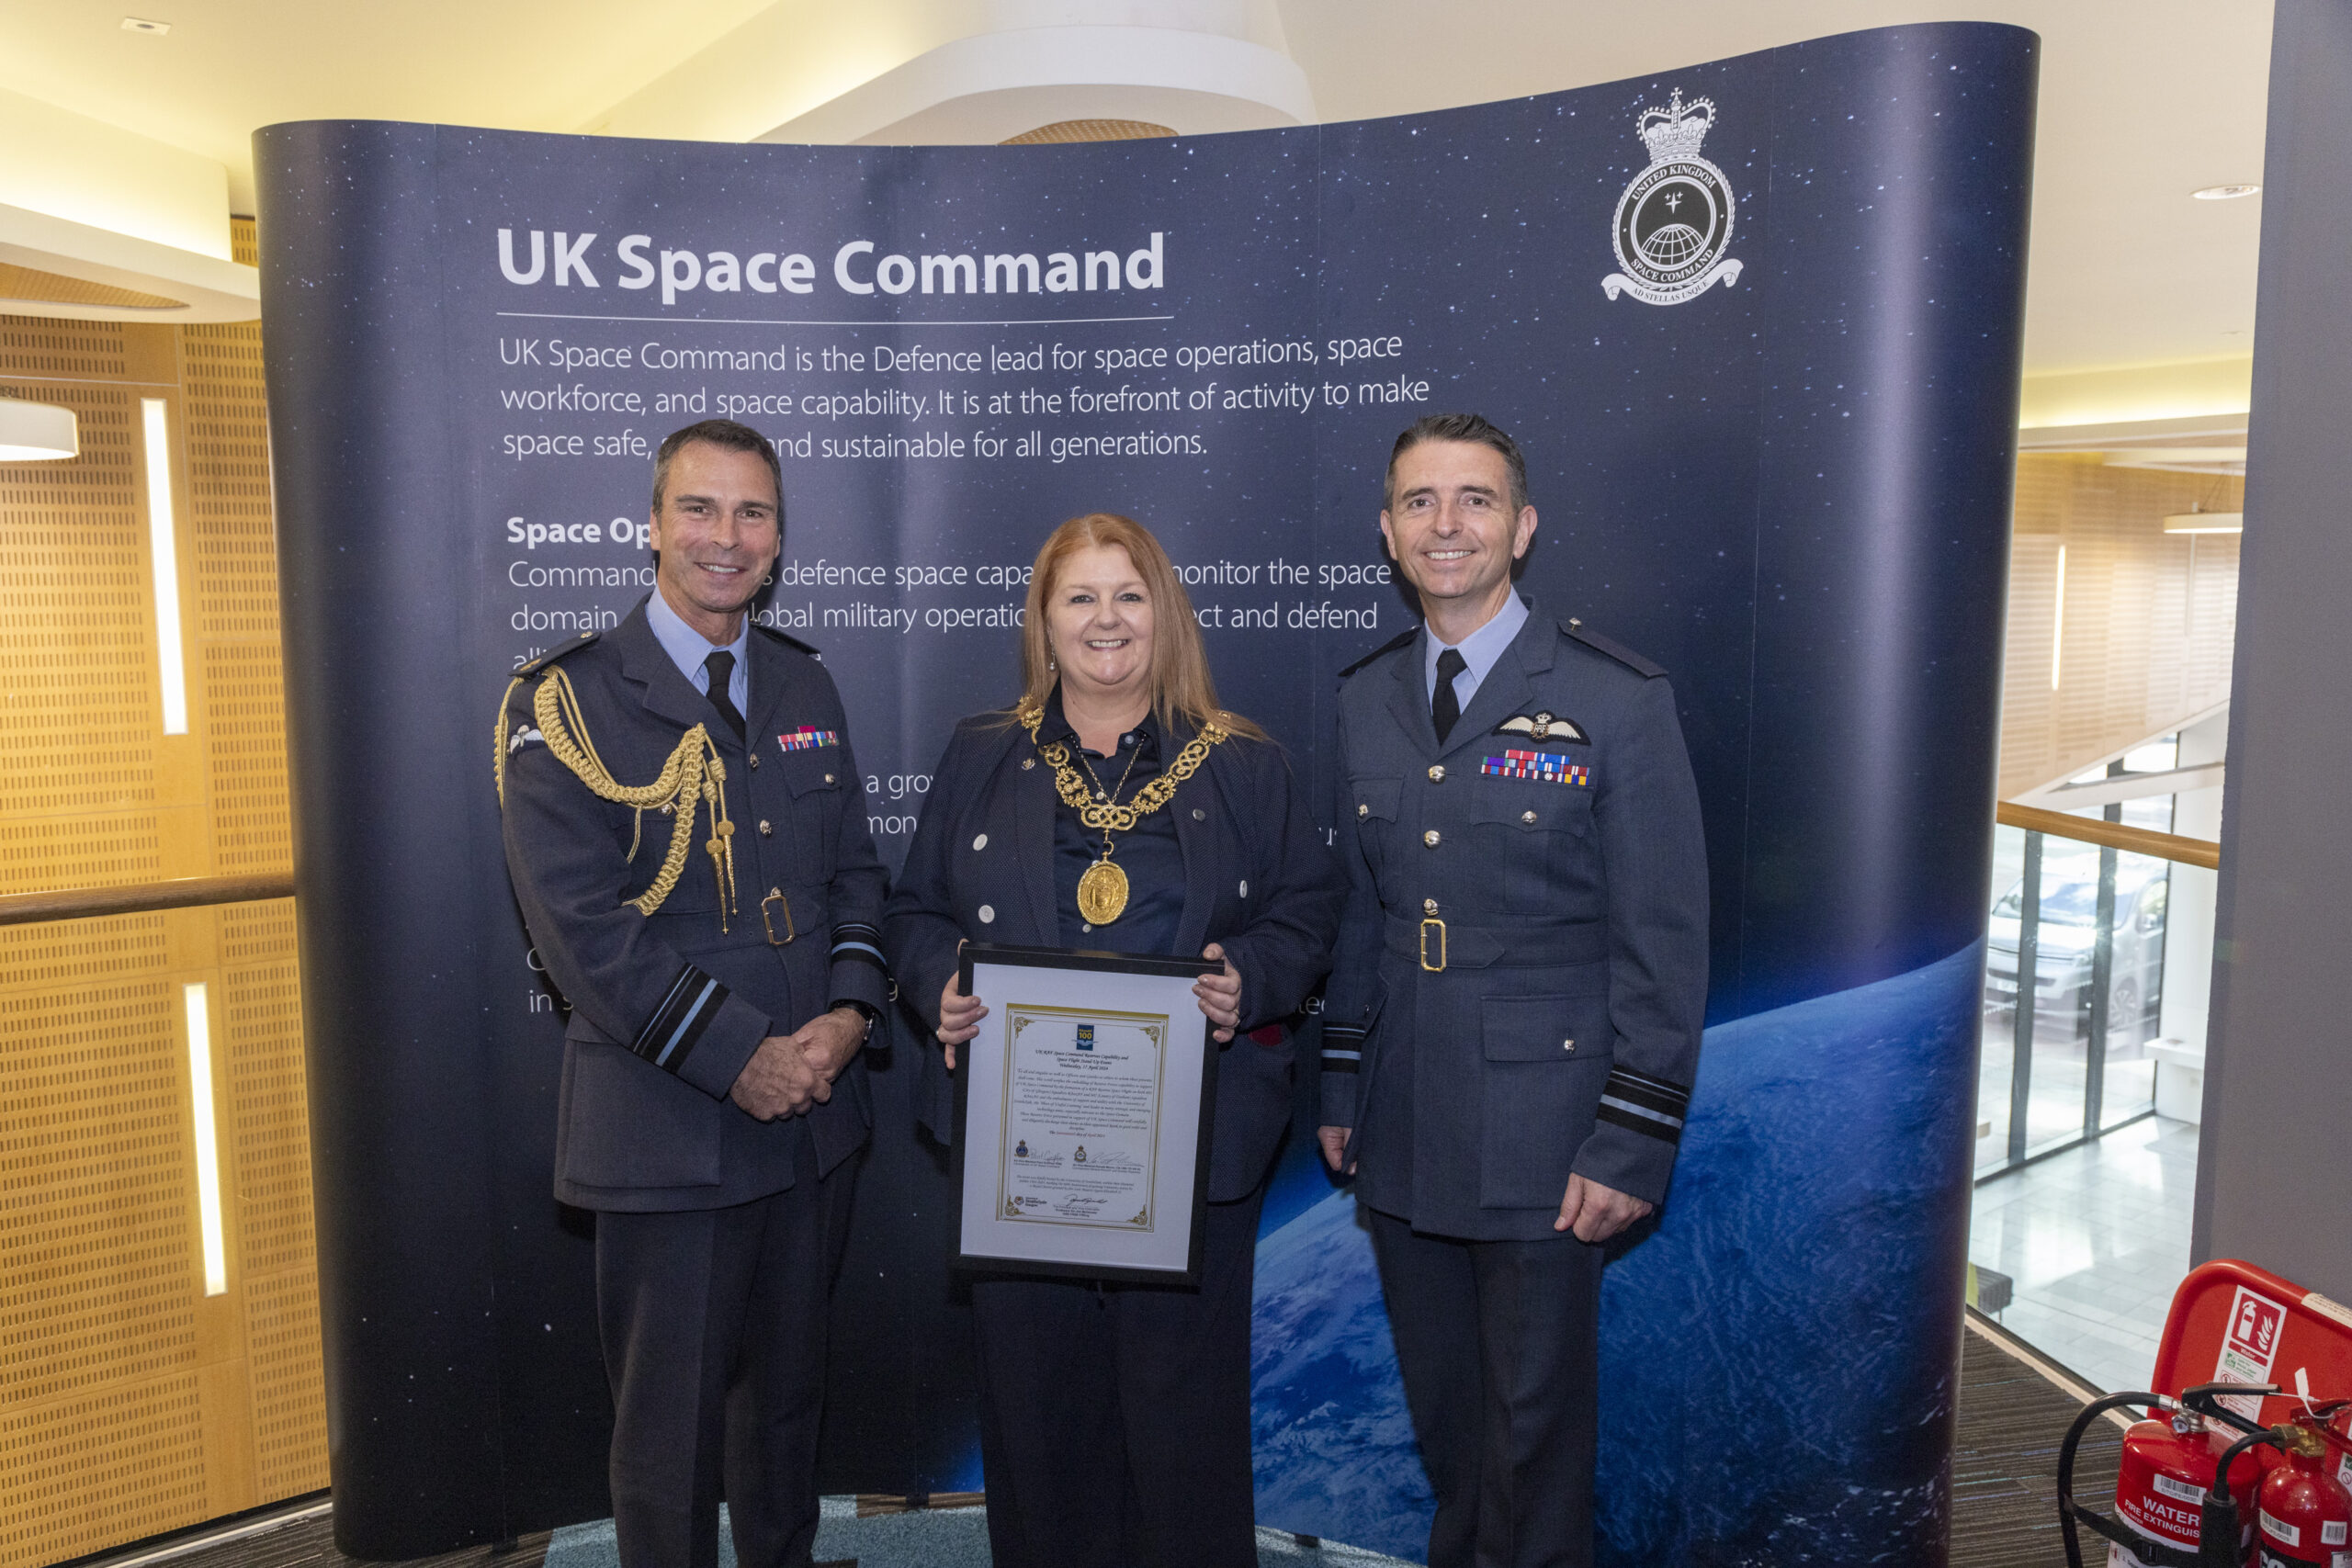 Lord Provost of the City of Glasgow Jacqueline McLaren stands between two RAF Reserve personnel at the 602 Squadron Space unit formation ceremony.